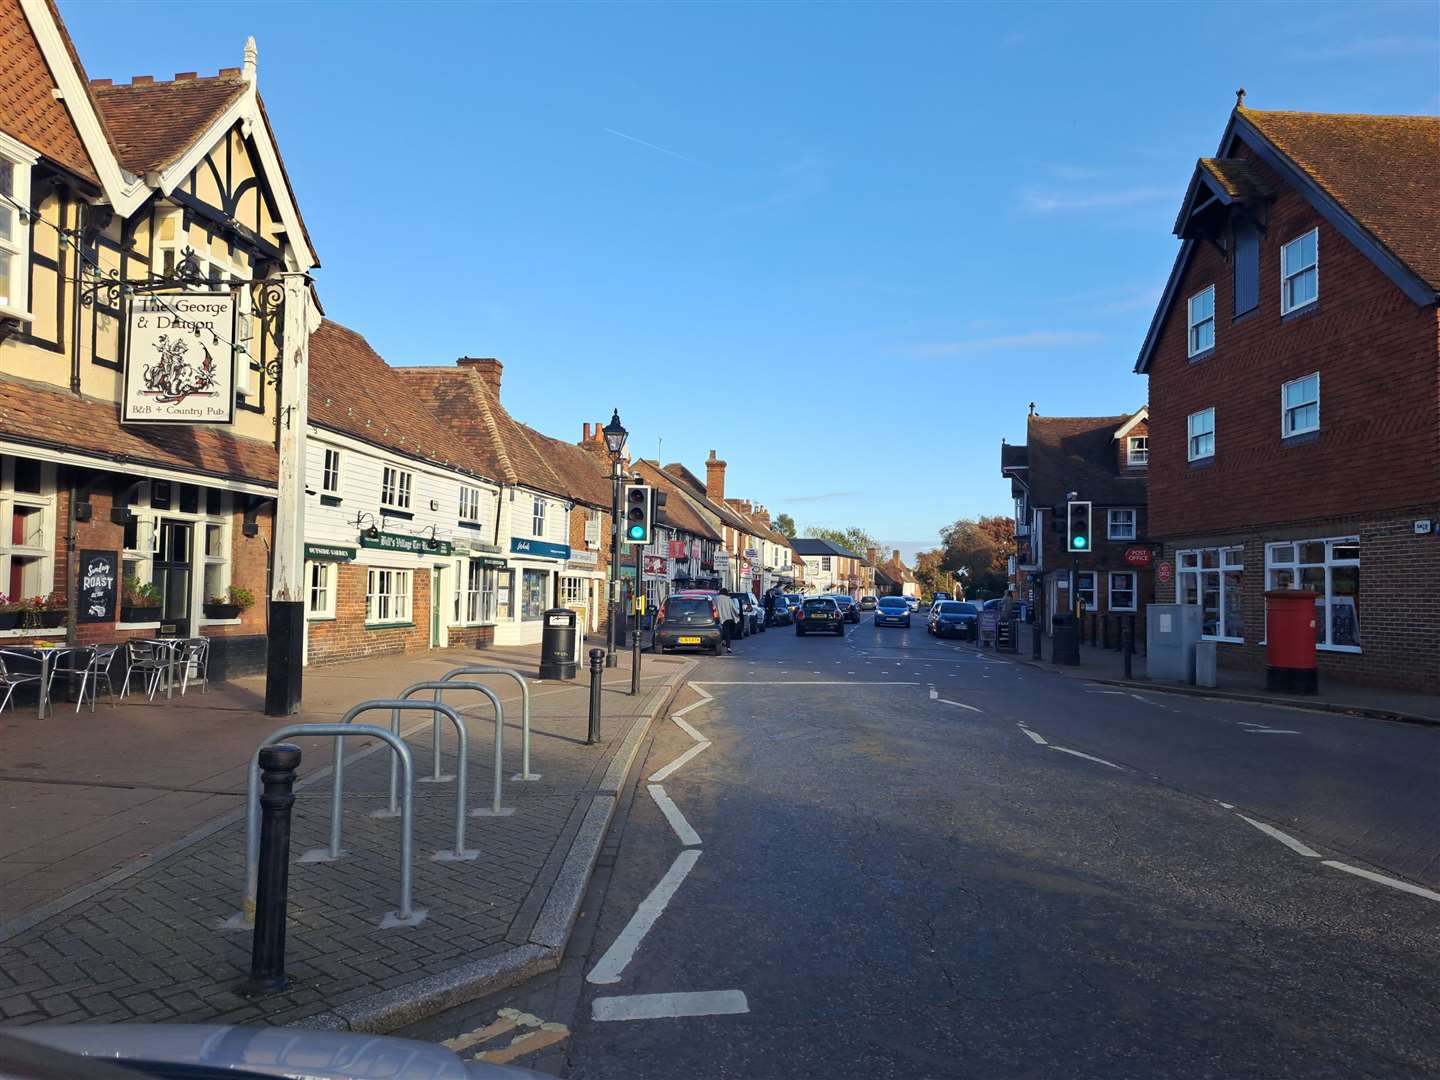 Headcorn is the most expensive place to live